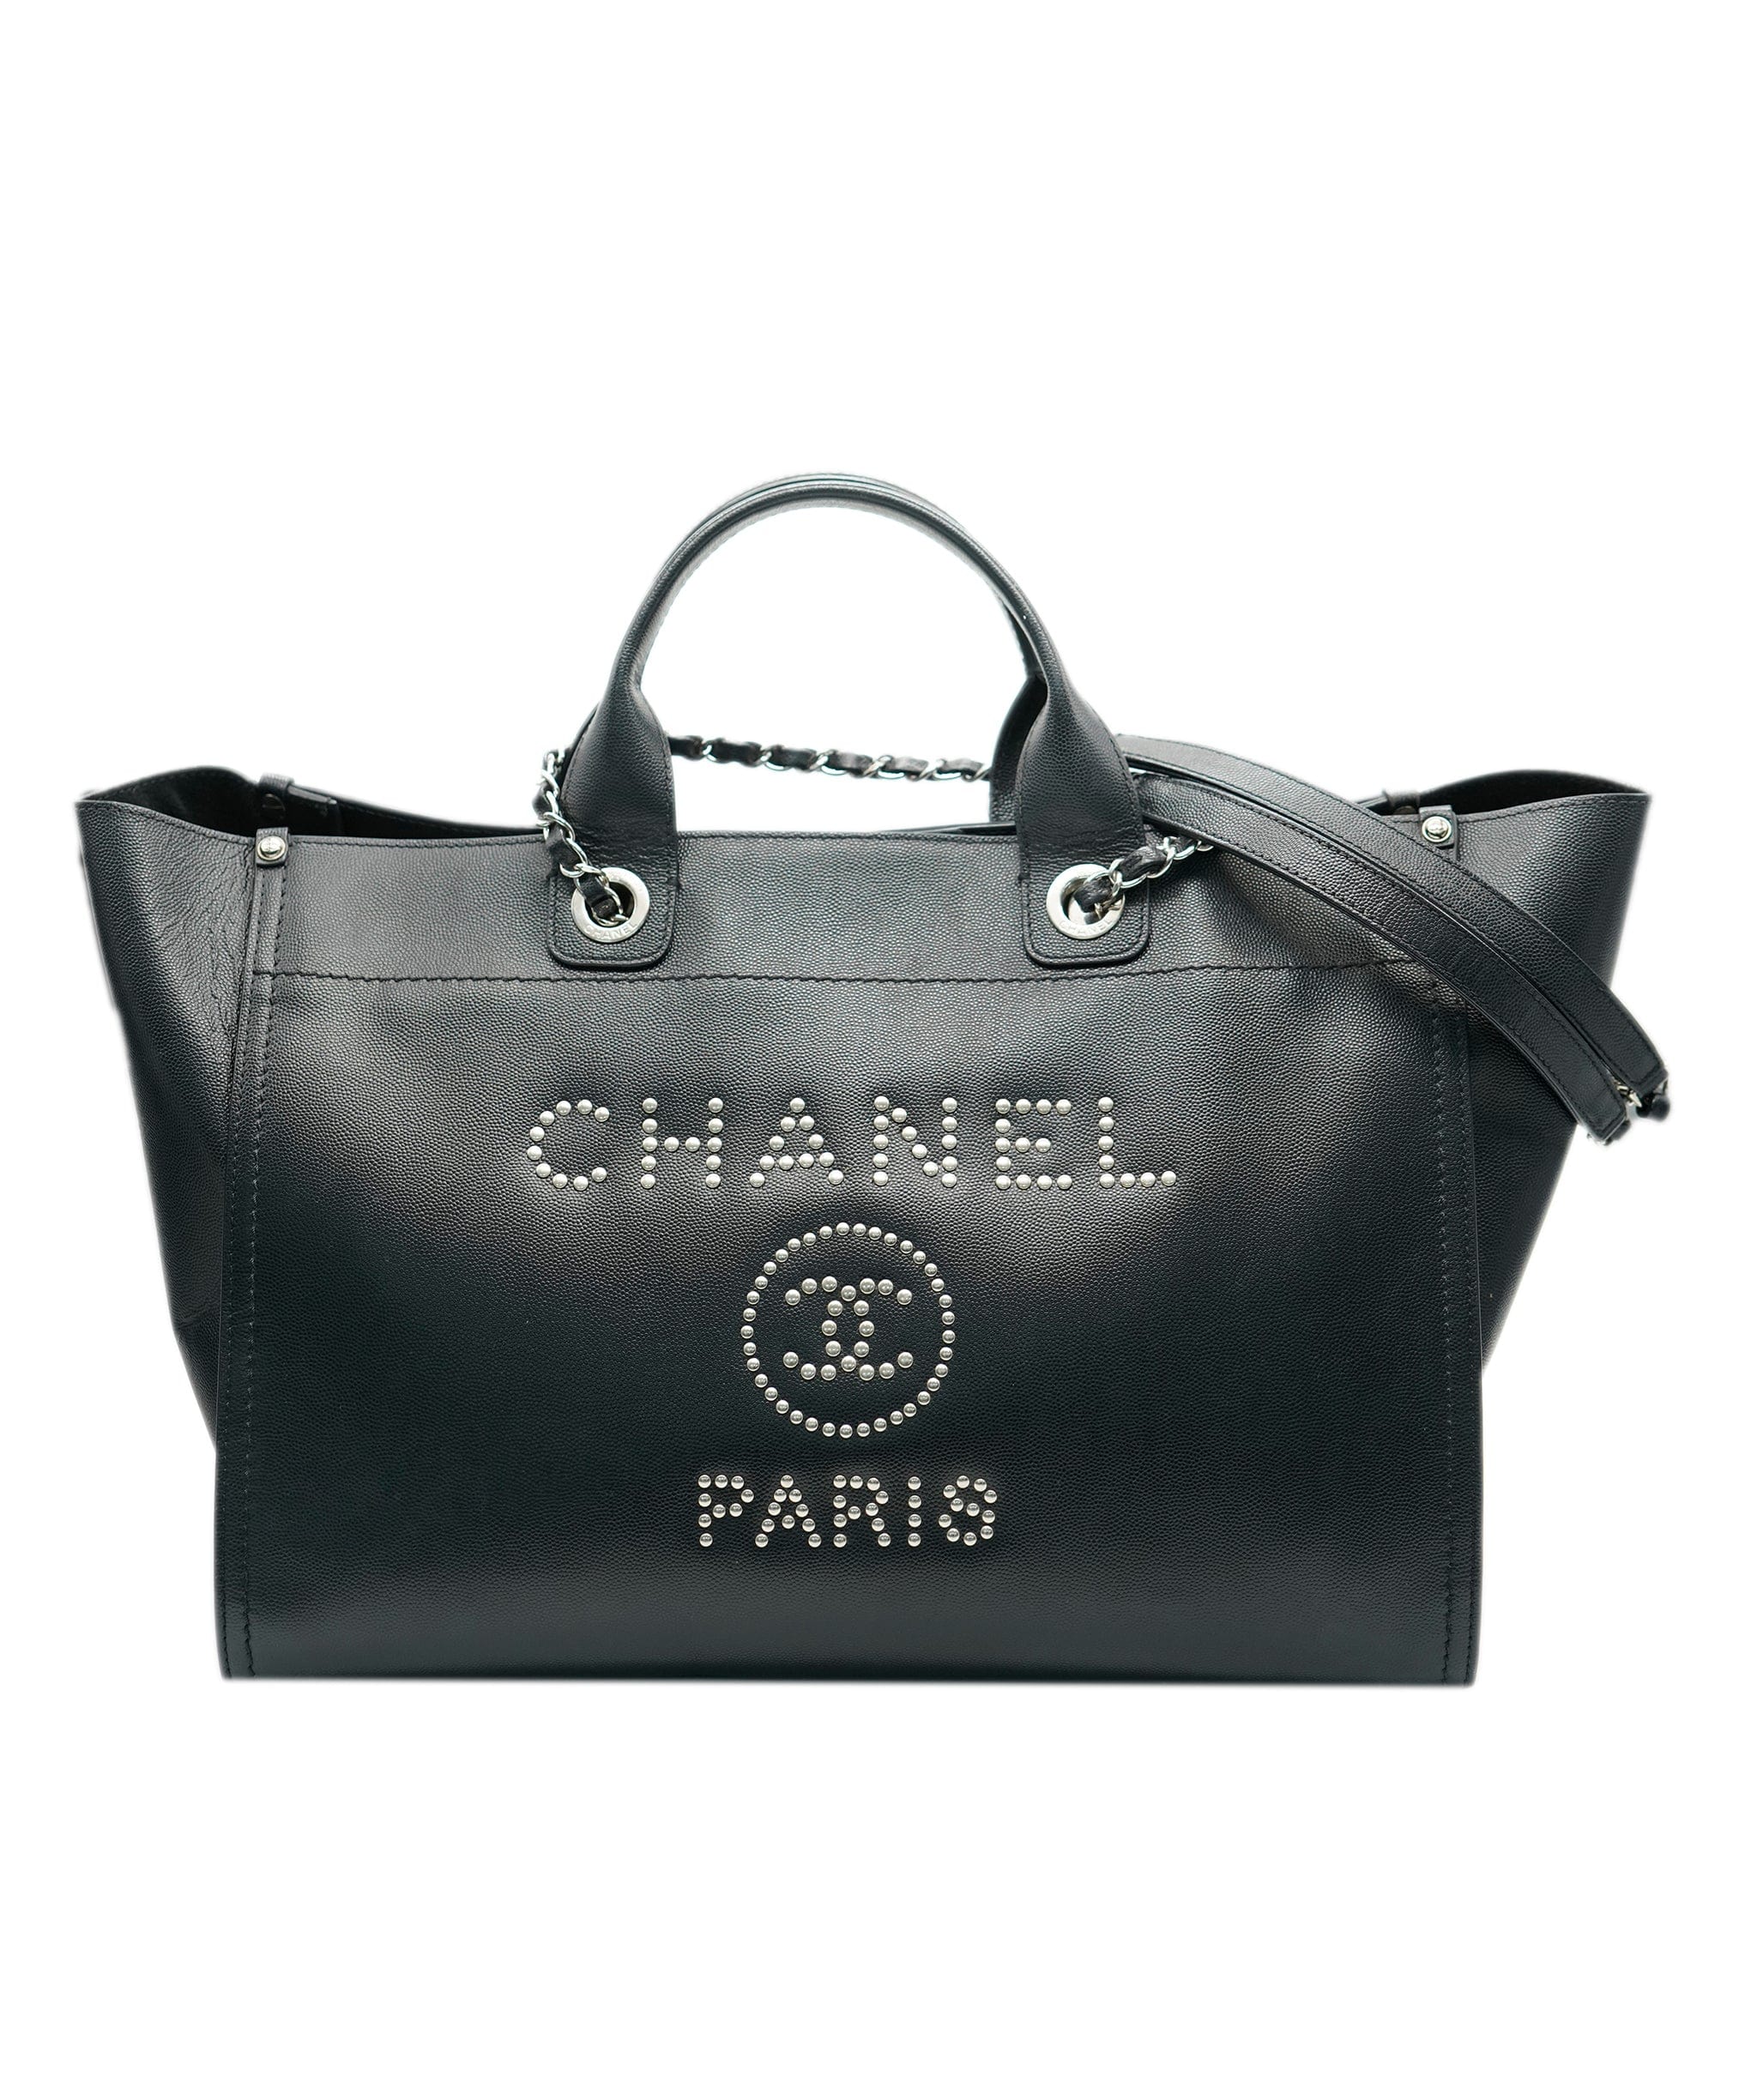 Chanel Chanel Leather Deuville Black Bag  ALC1308